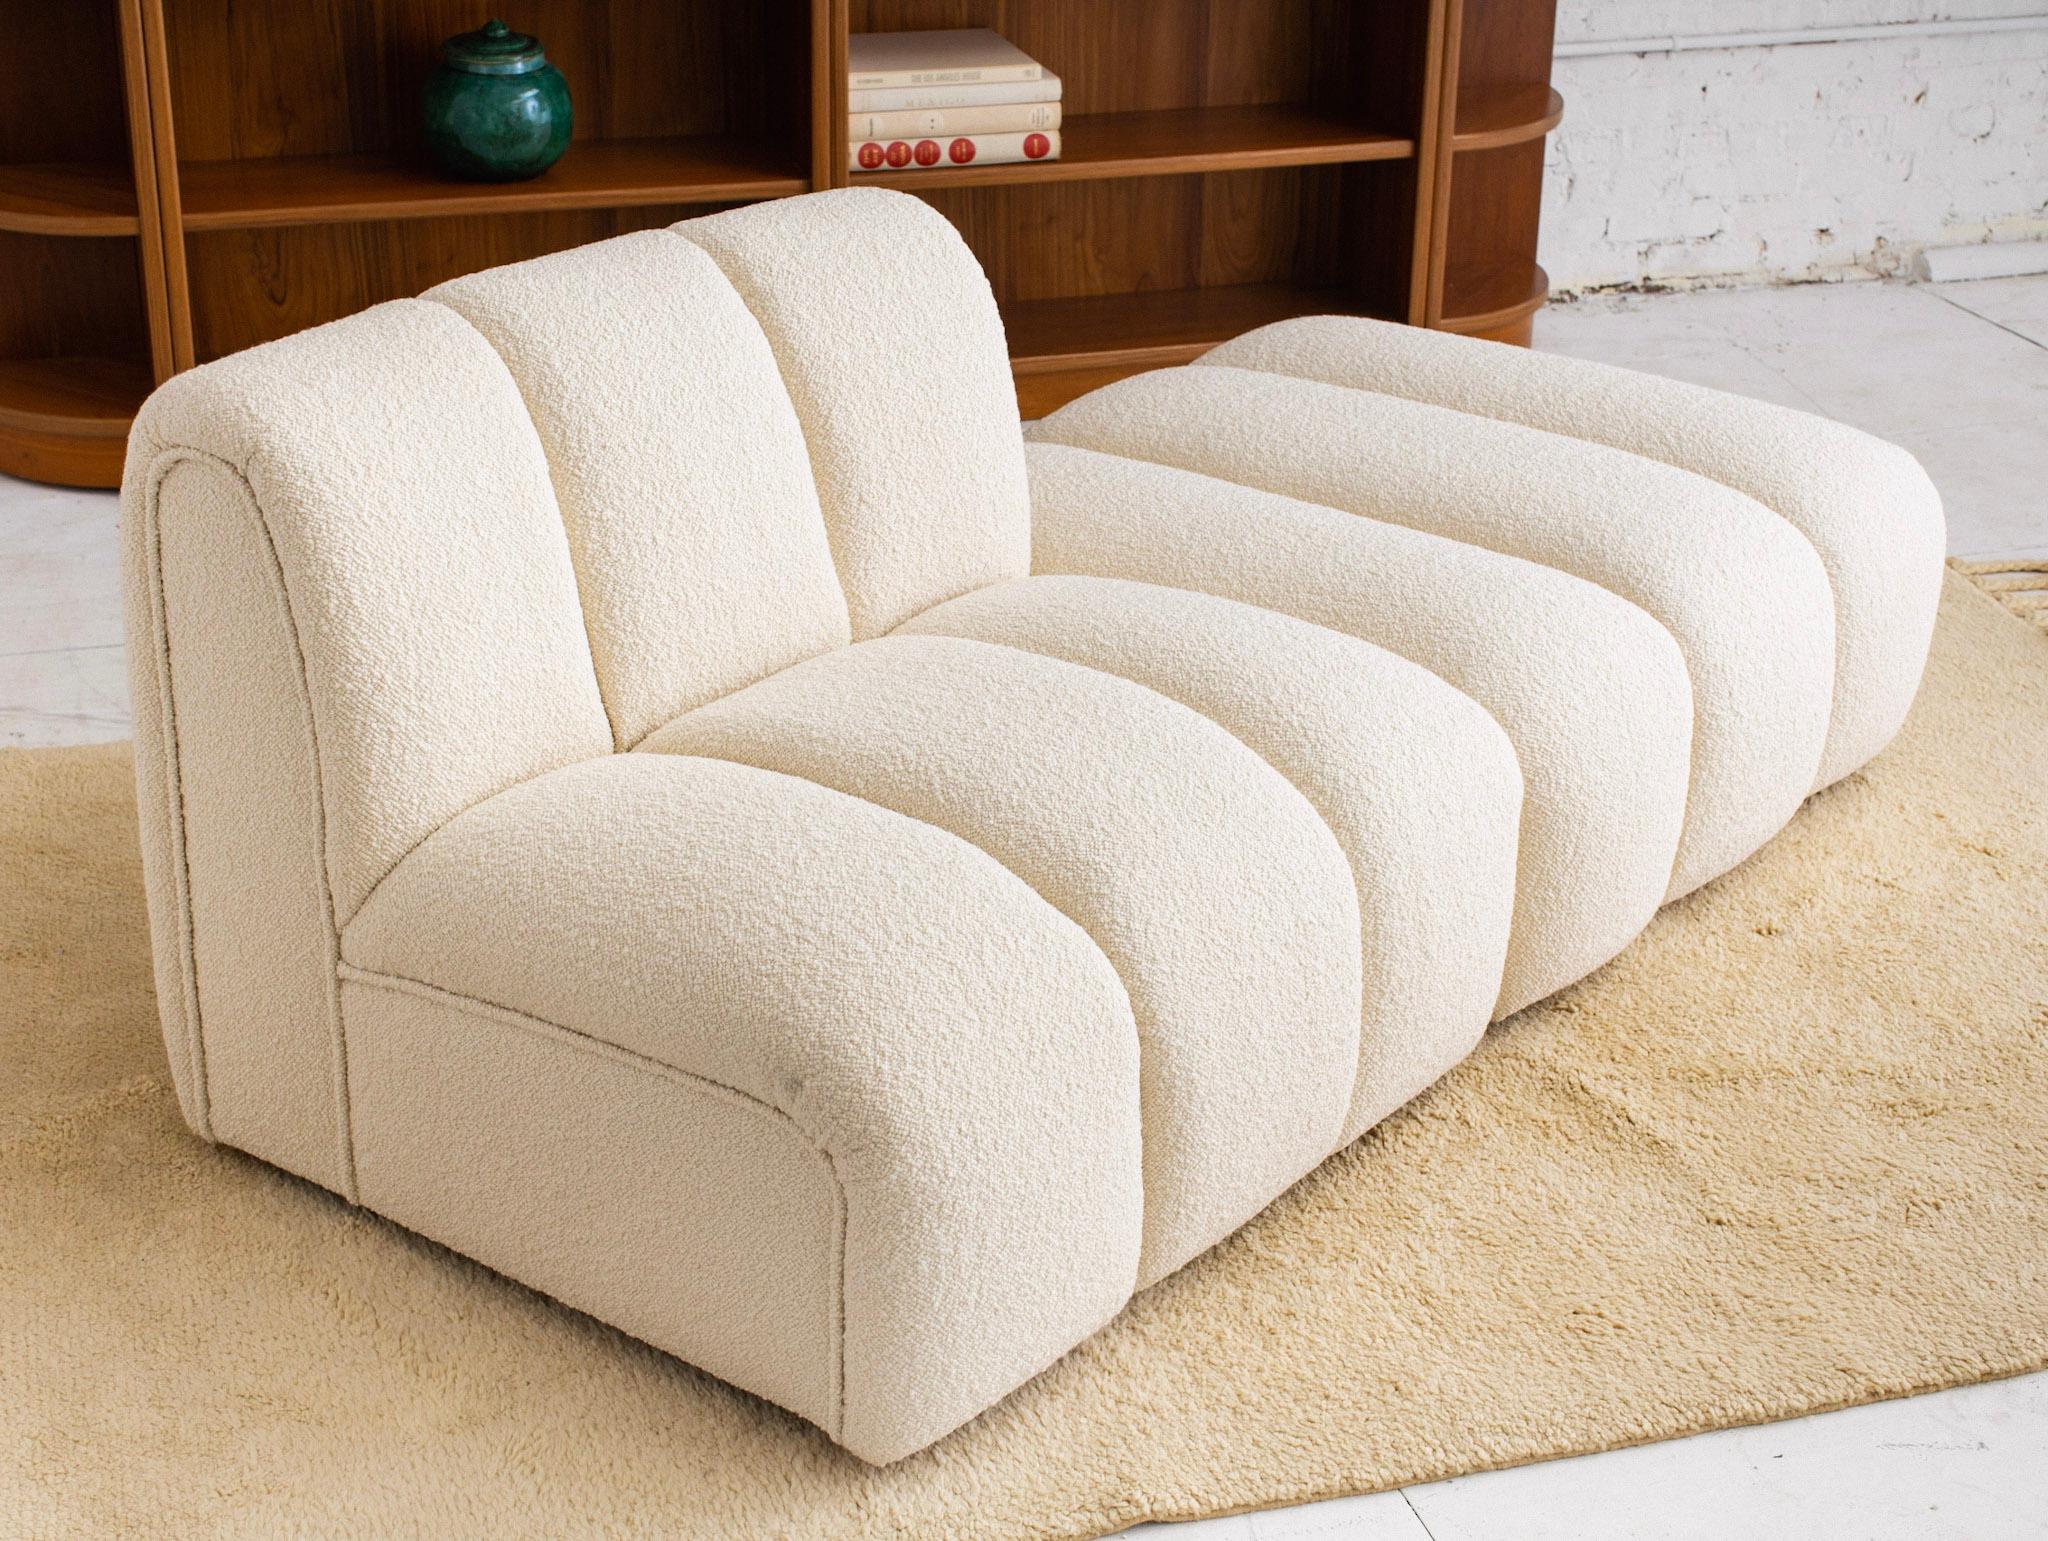 Channeled chair and ottoman in ivory wool boucle. Ottoman is on castors to allow for easy rearrangement. Produced by Bernhardt Furniture Co. The Flair Division, was created in 1958 to expand Barnhardt's offerings to include high-quality upholstered